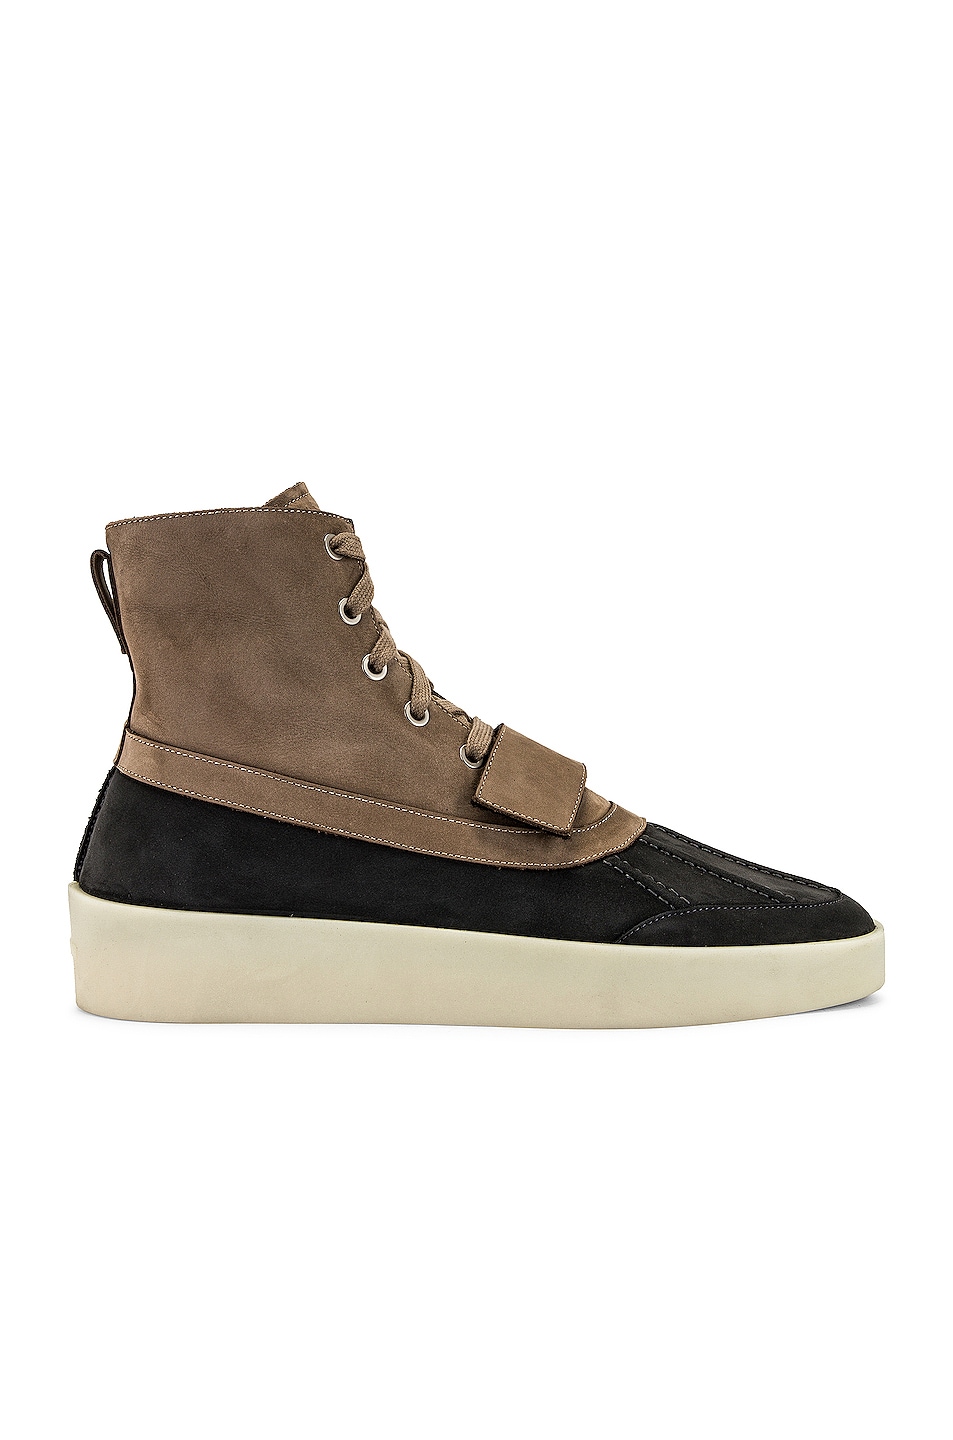 Fear of God Duck Boot in Taupe | FWRD